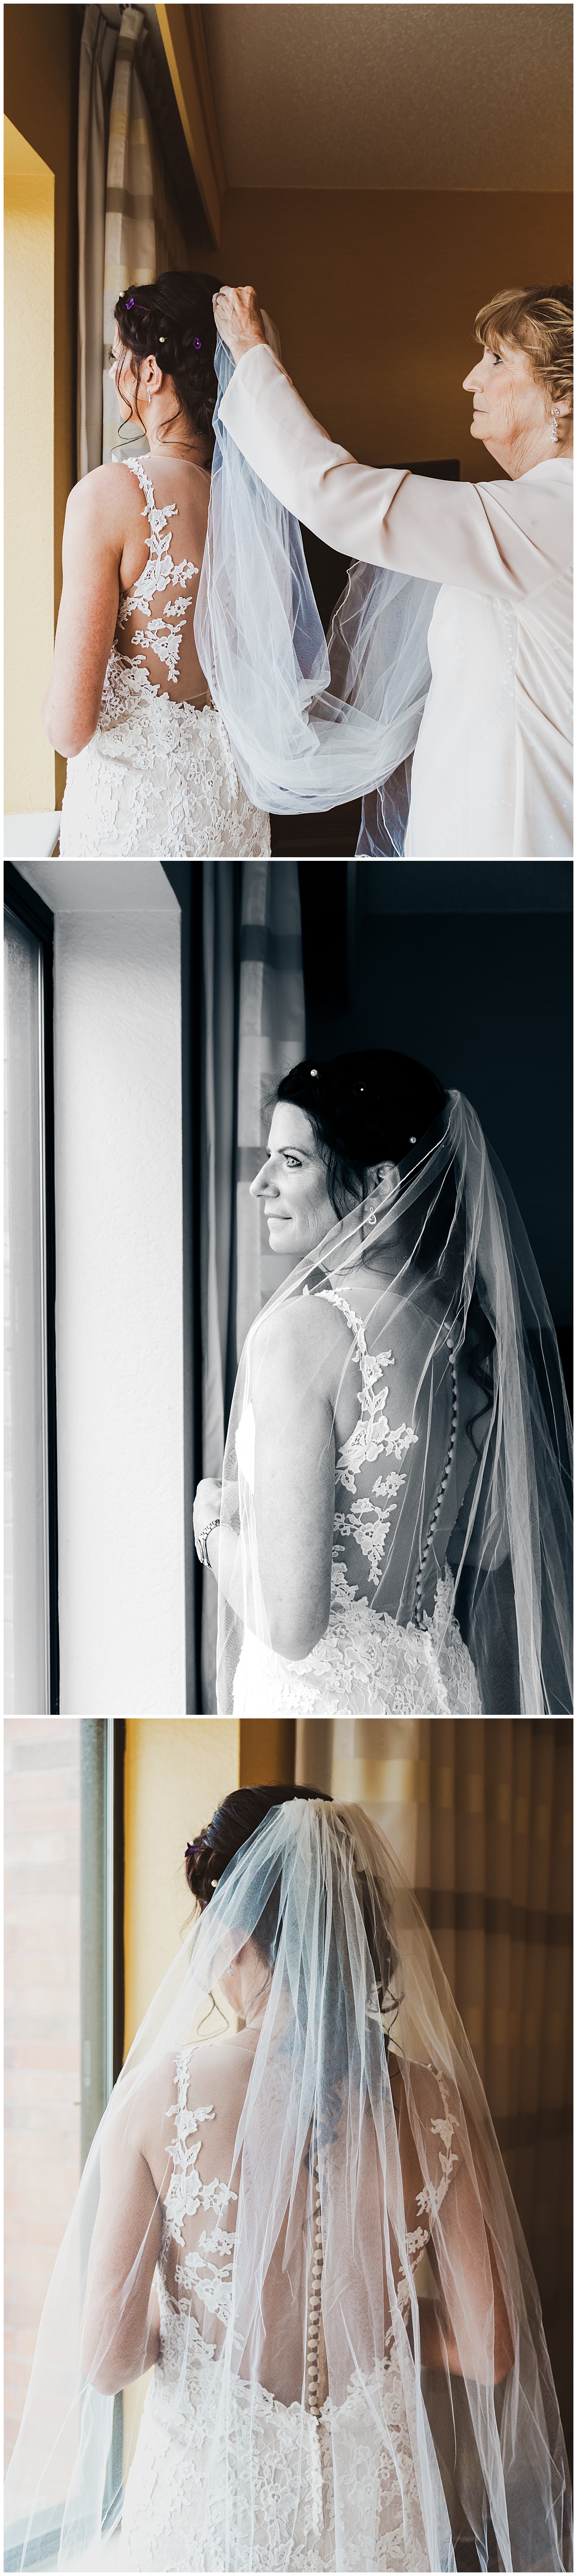 bride putting on veil by window